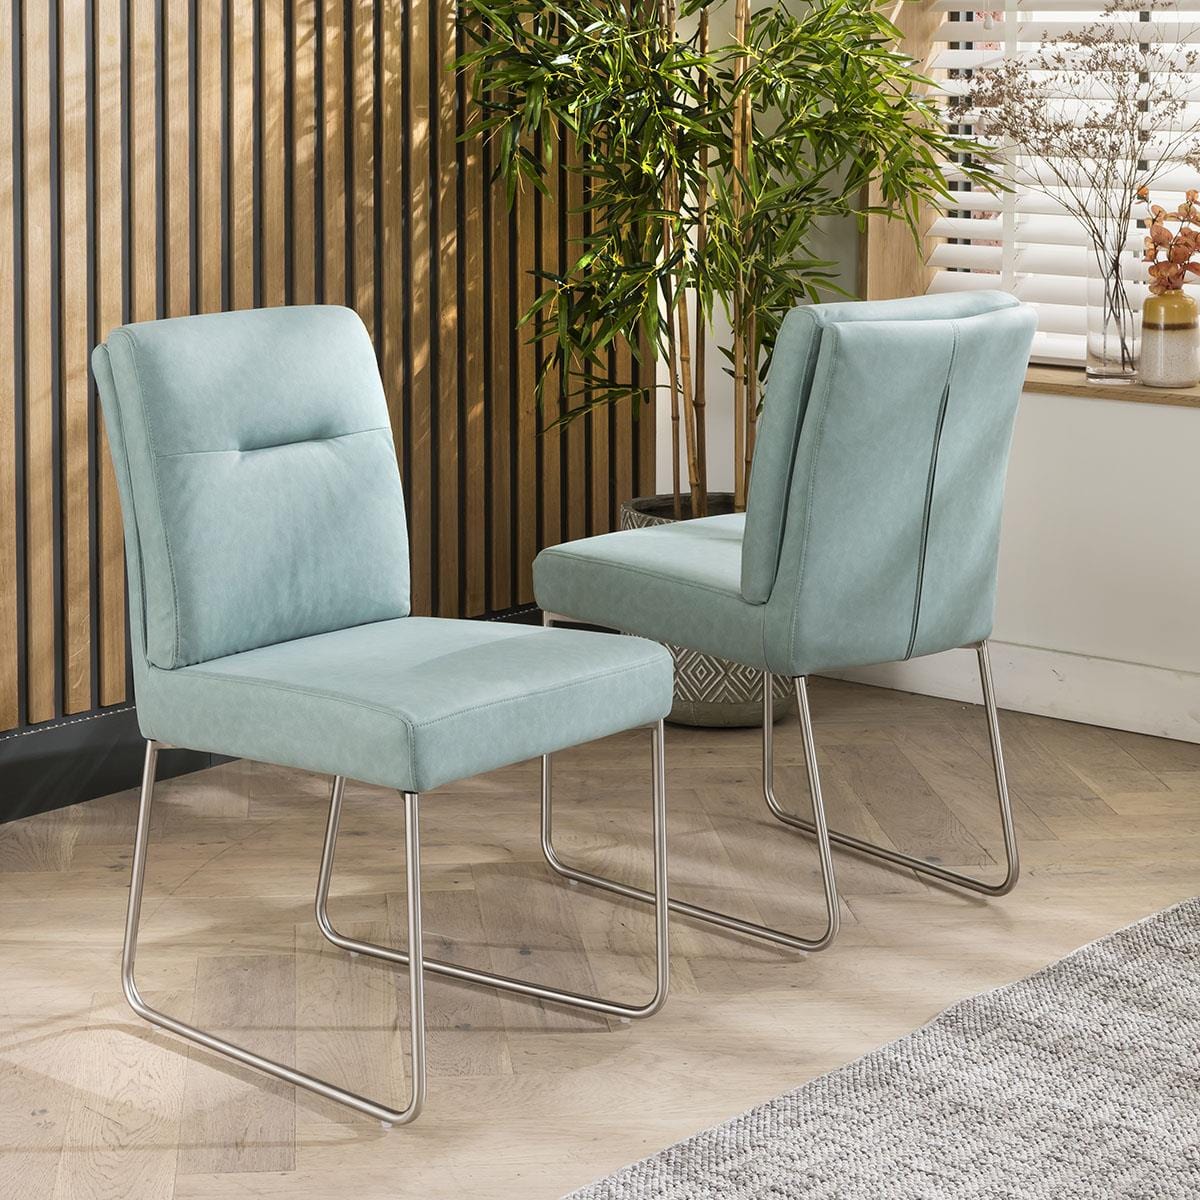 Quatropi 2 Taylor Faux Leather Dining Chairs Mint Green